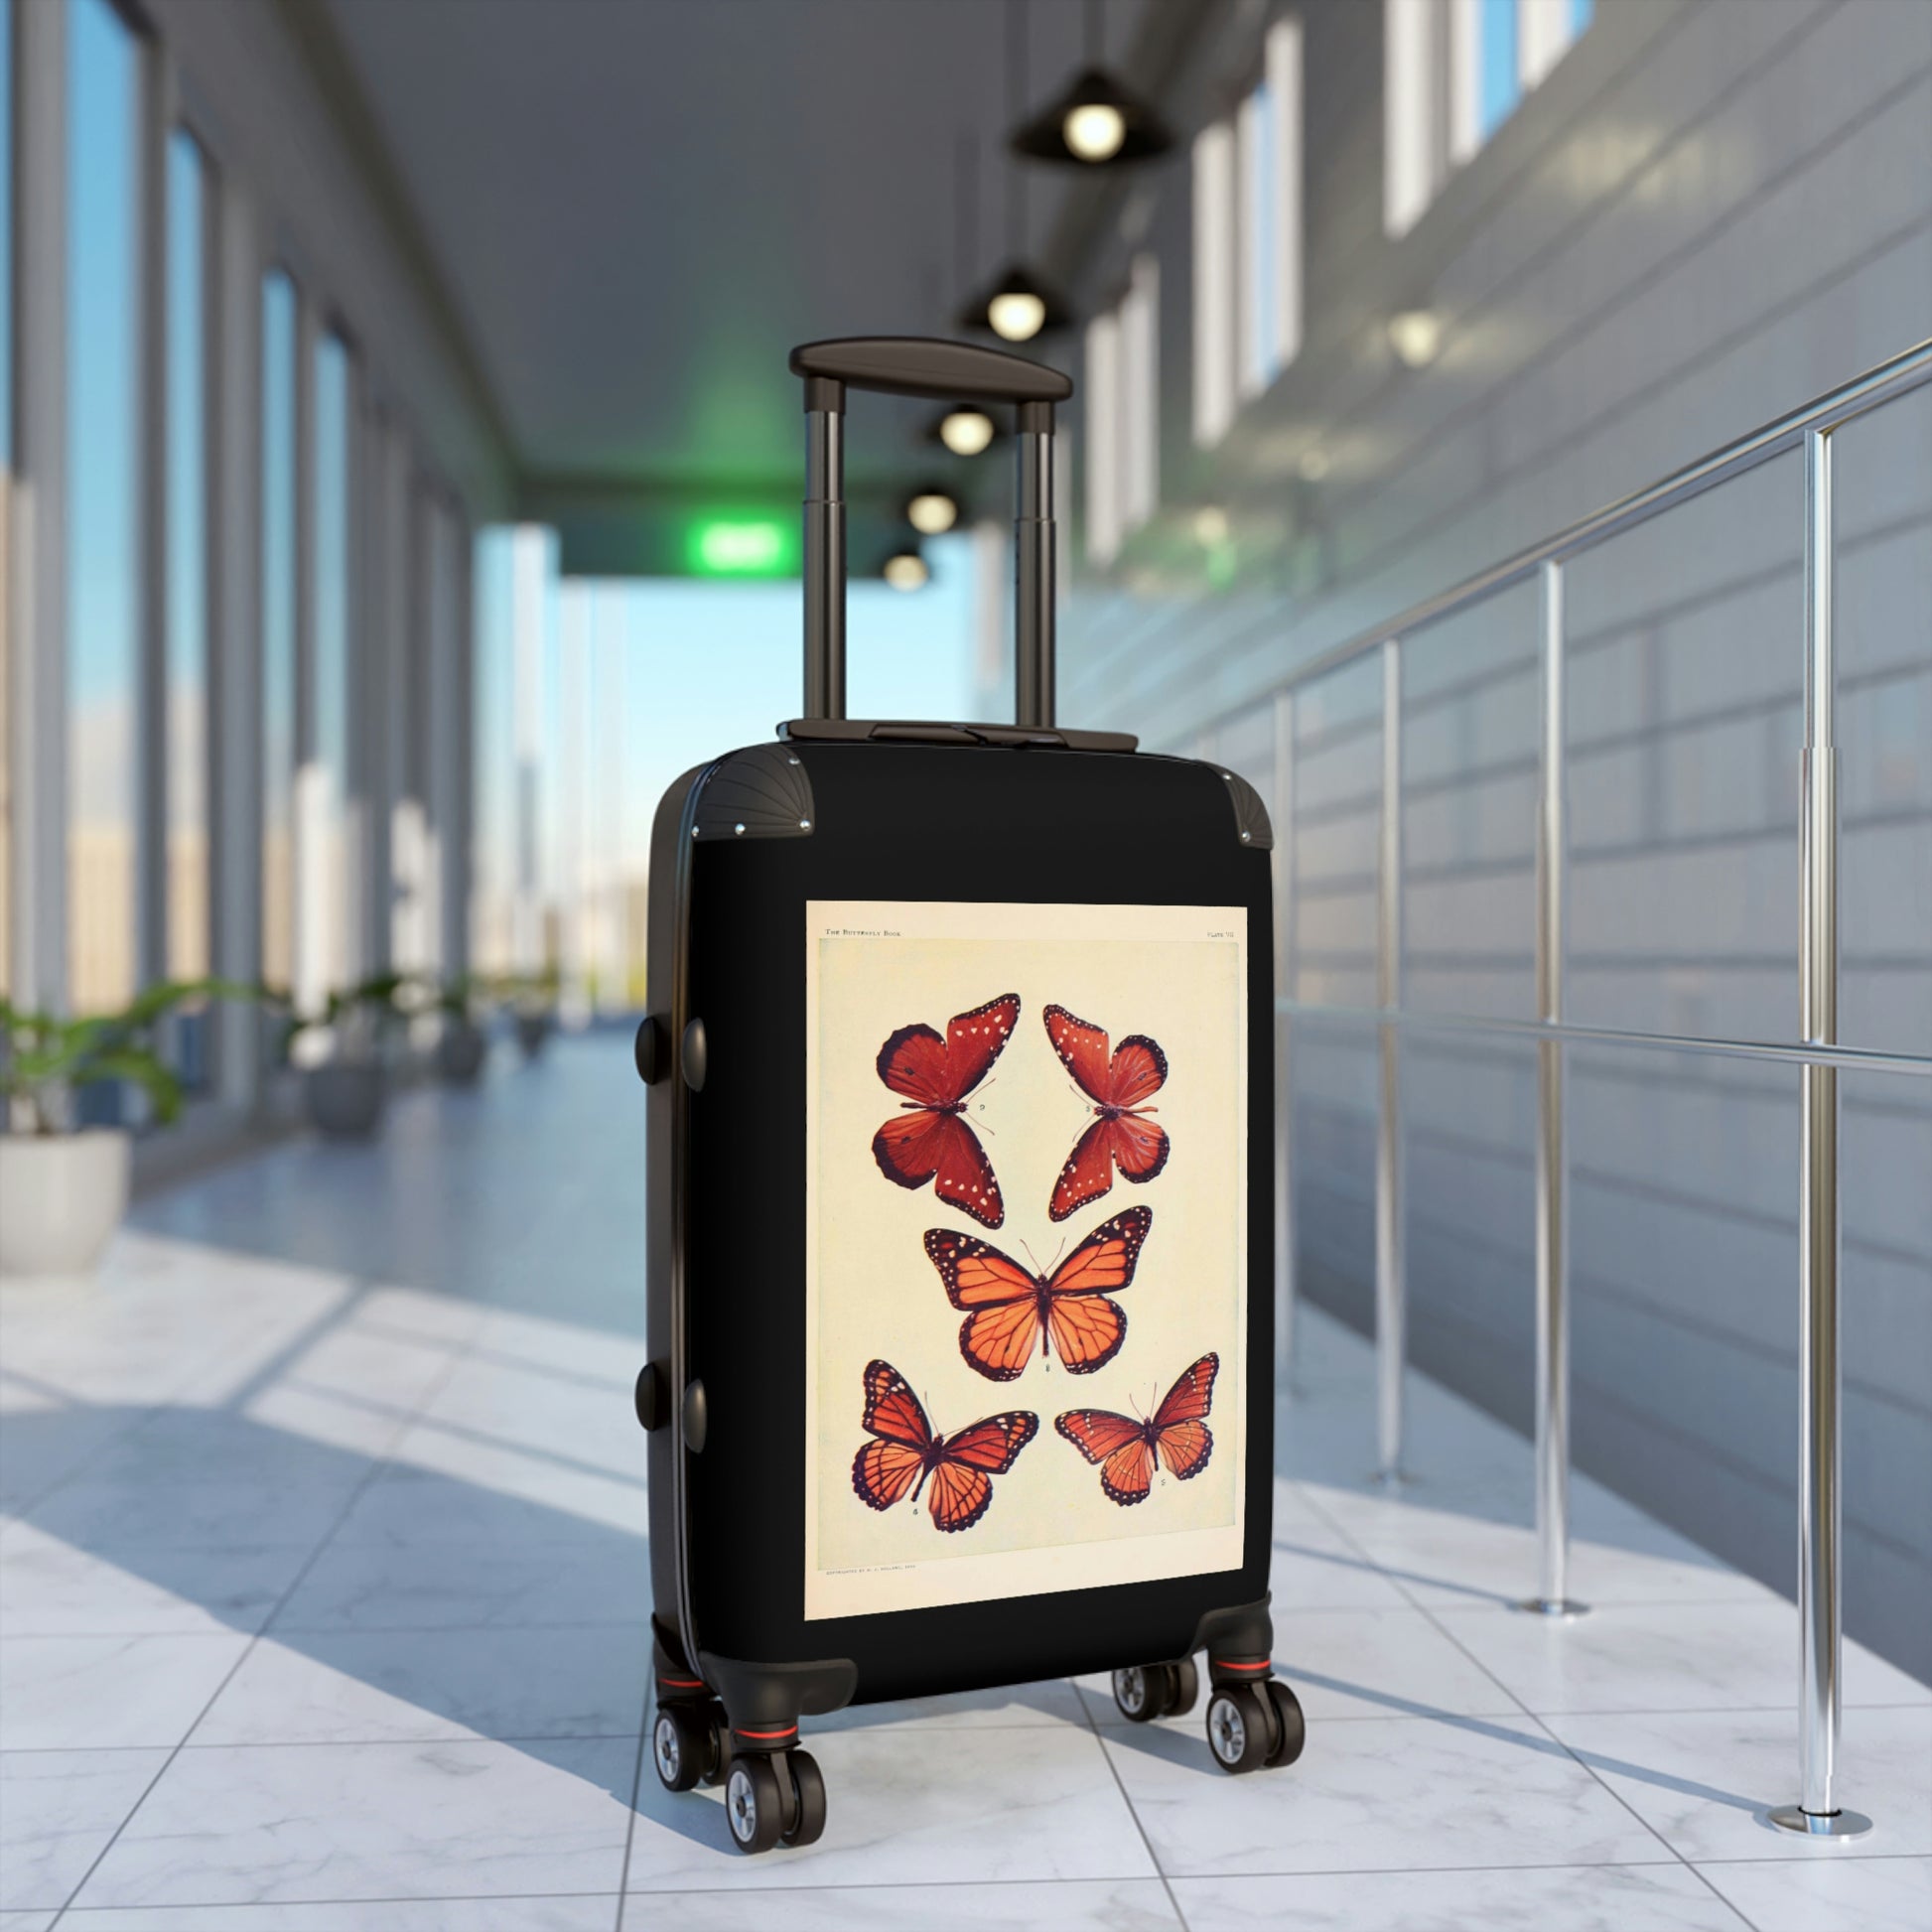 Getrott The Butterfly Book Butterflies Macrolepidopteran Rhopalocera Red Lepidoptera Black Cabin Suitcase Rolling Luggage Inner Pockets Extended Storage Adjustable Telescopic Handle Inner Pockets Double wheeled Polycarbonate Hard-shell Built-in Lock